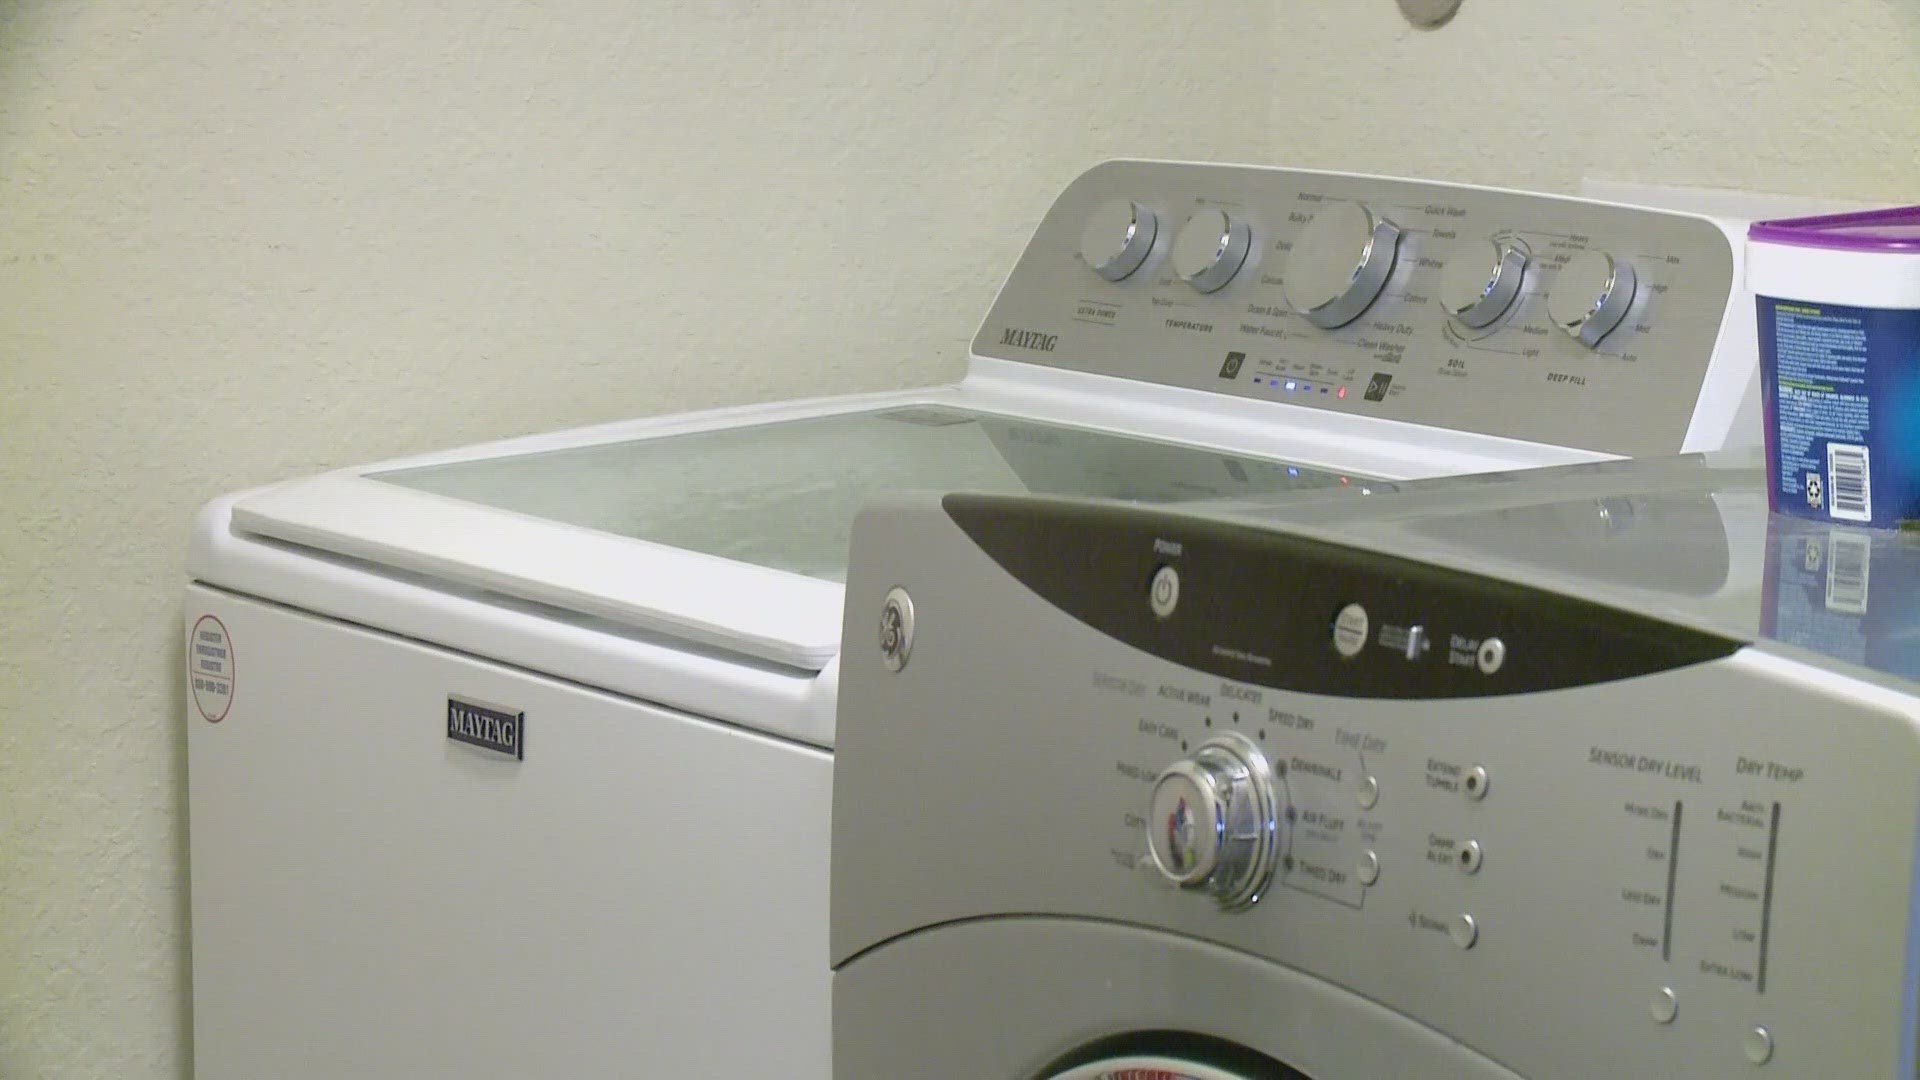 Imagine buying a new washing machine, then shortly after that a repairman has to come out more than half a dozen times... and it's still not working right!